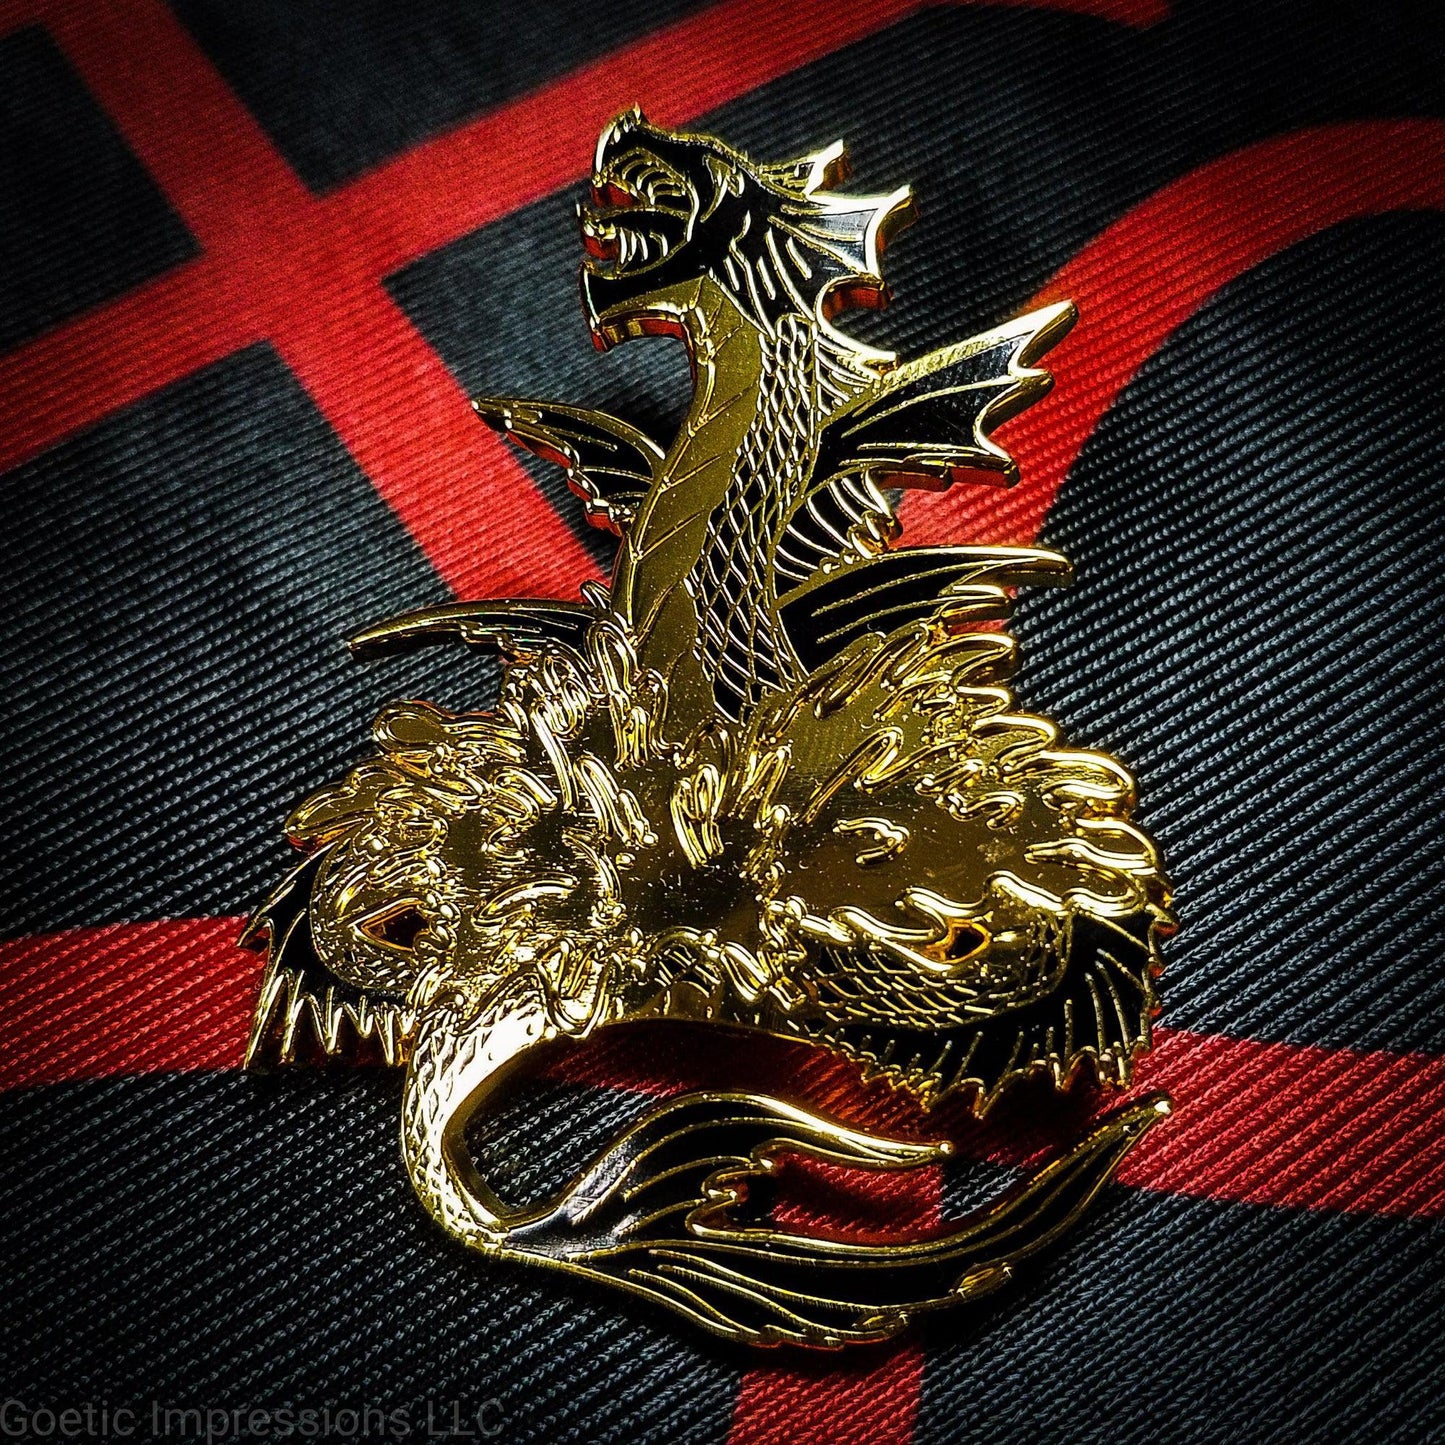 A black and gold hard enamel pin of the sea serpent Leviathan. Leviathan is shown bursting from waters and jaws wide open. The pin is on an altar black and red altar cloth with Levithan's sigil on it.